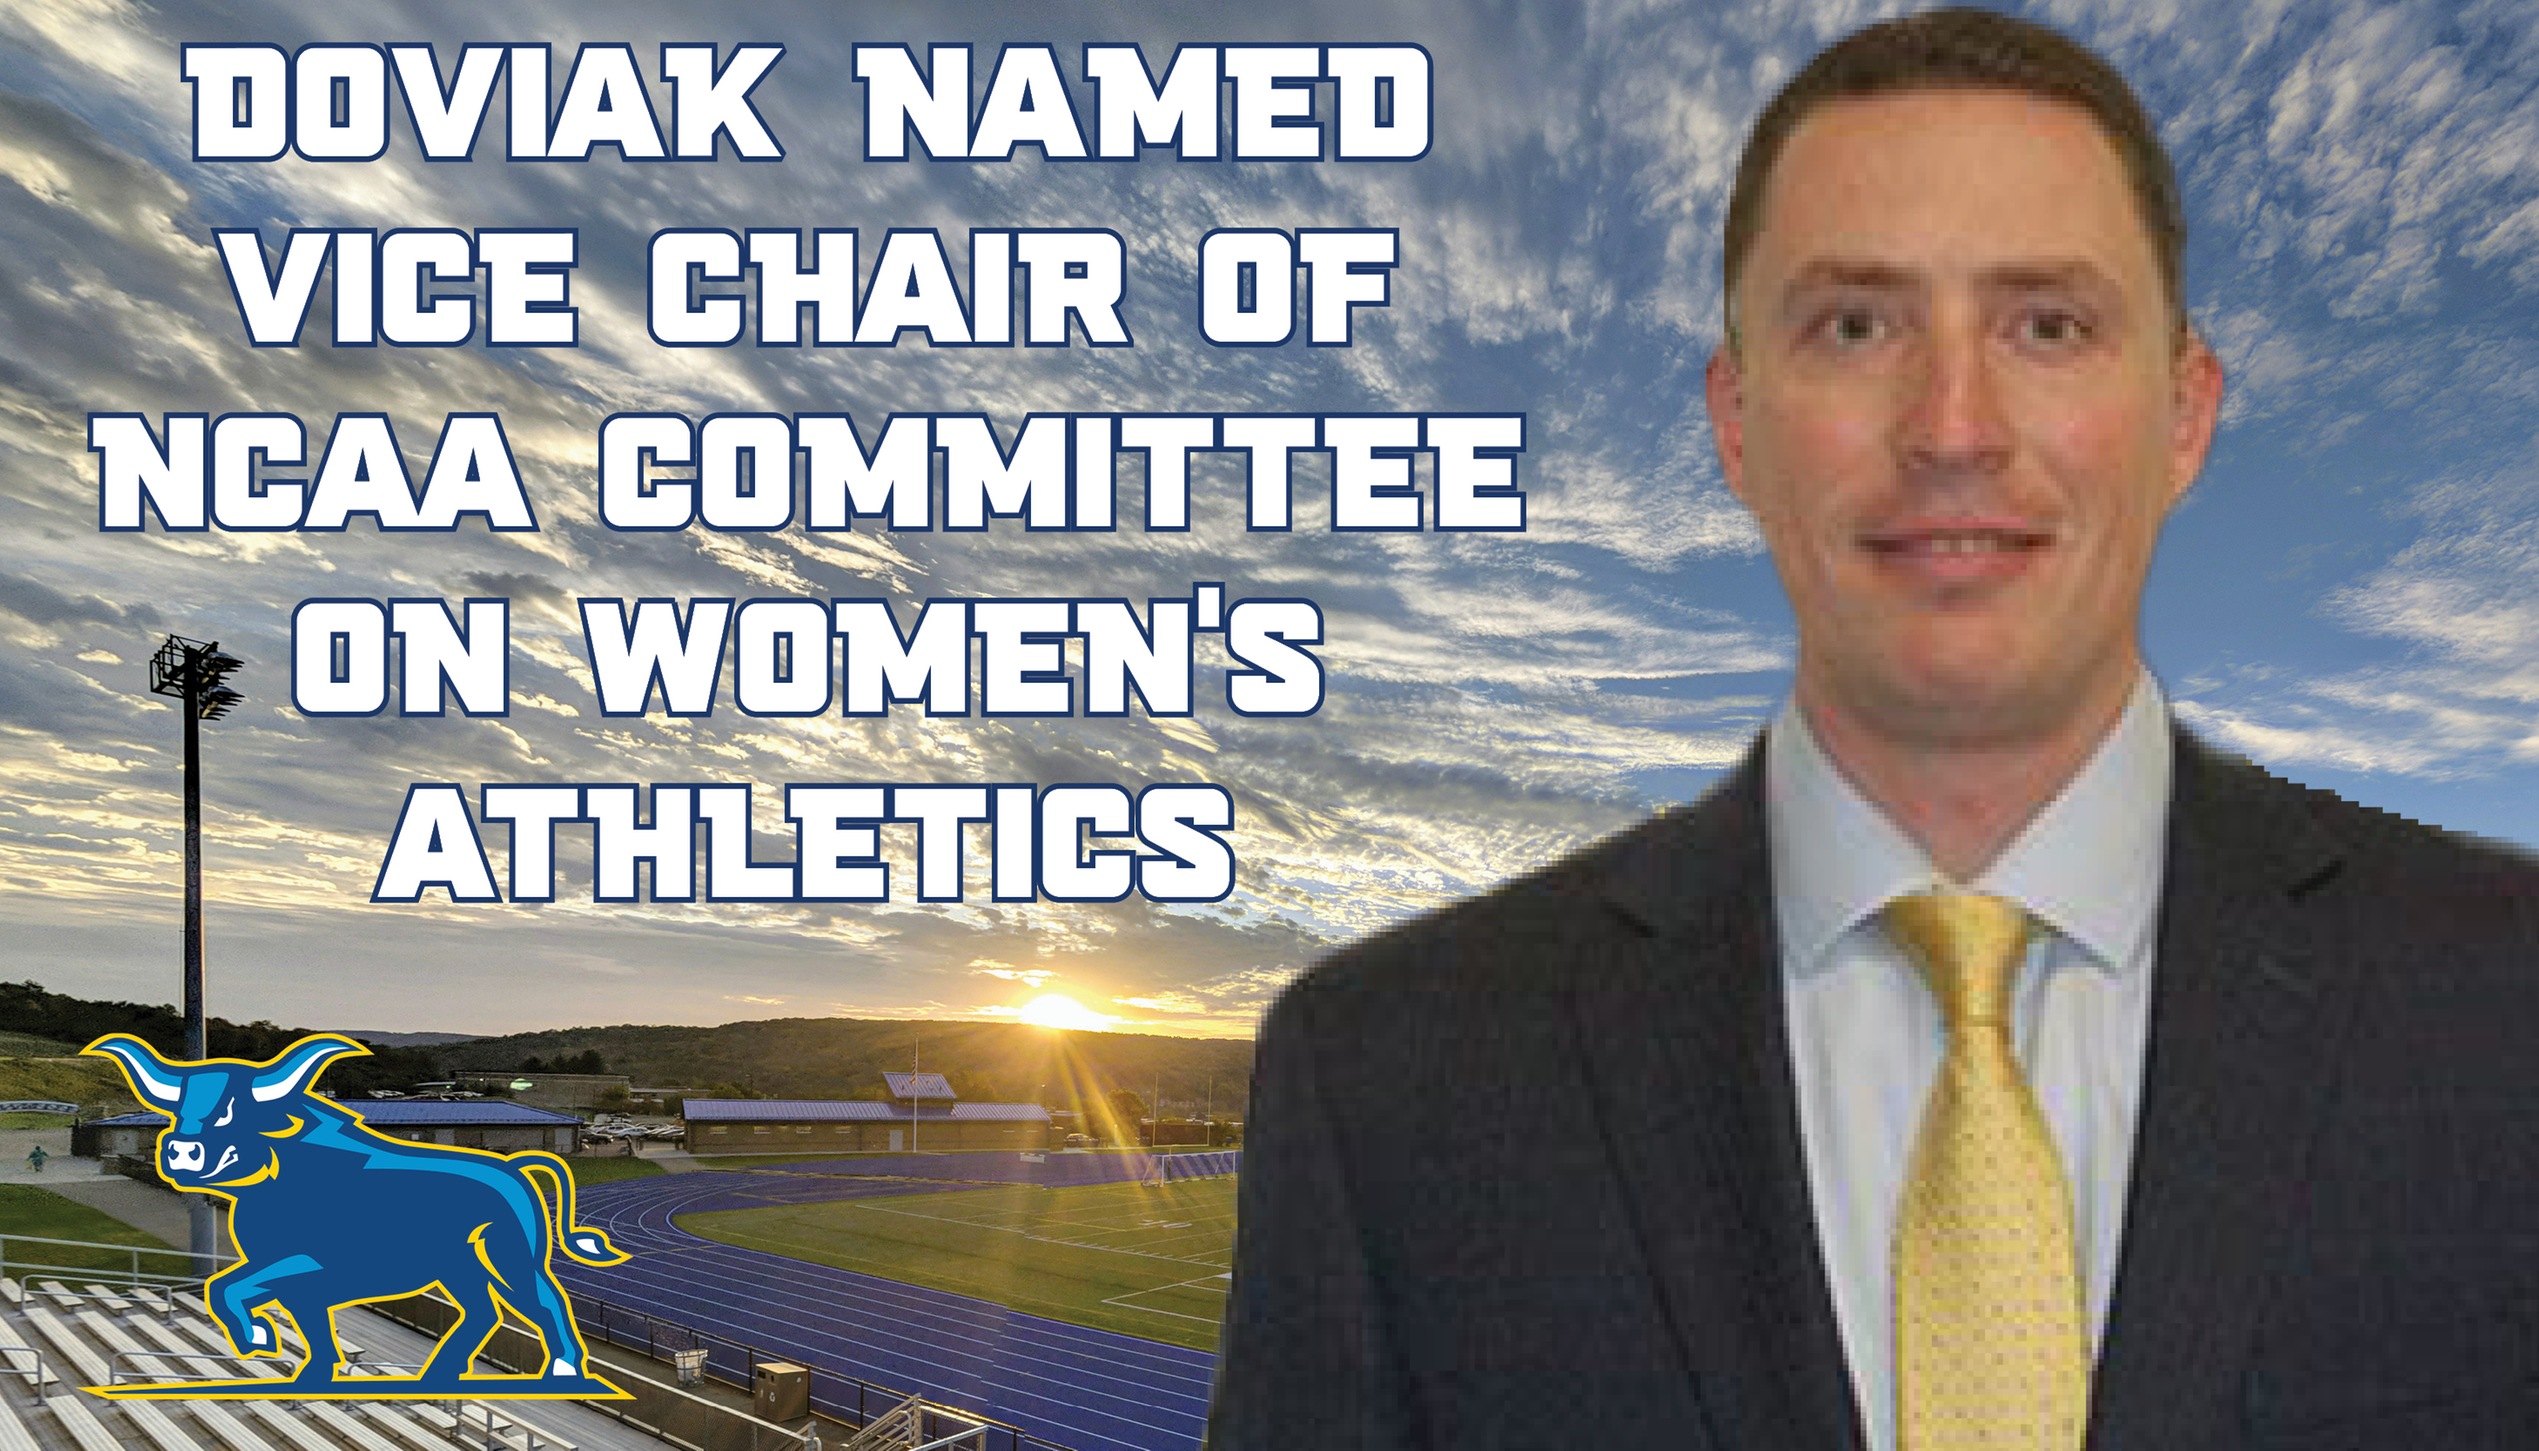 Headshot of Jason Doviak - who was recently named Vice Chair of NCAA Committee on Women's Athletics.